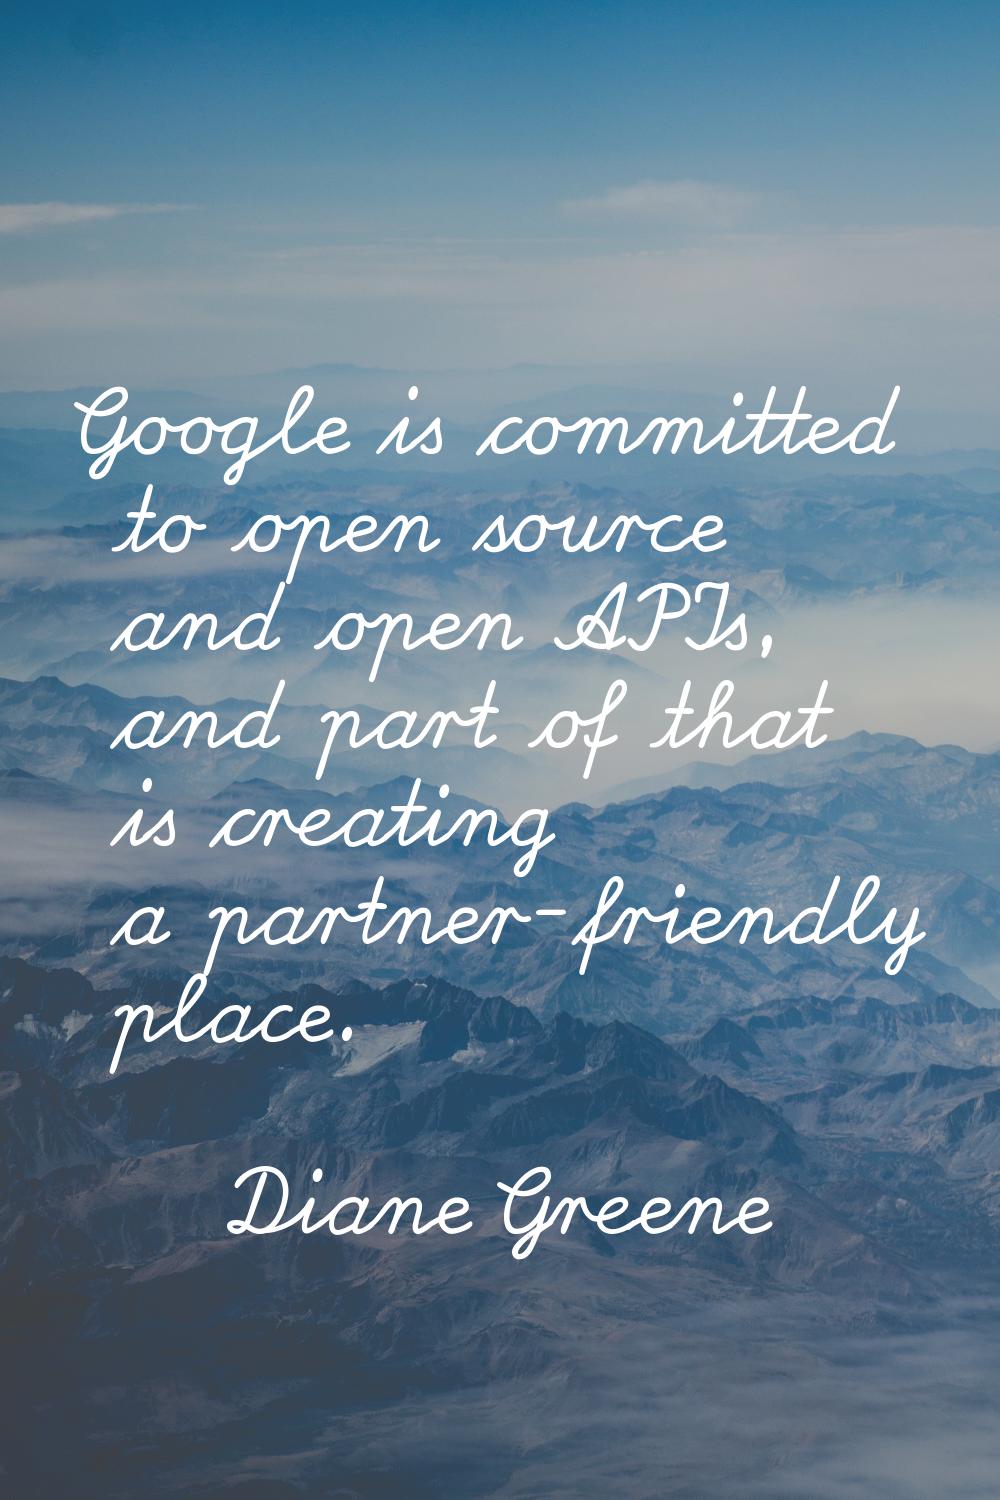 Google is committed to open source and open APIs, and part of that is creating a partner-friendly p